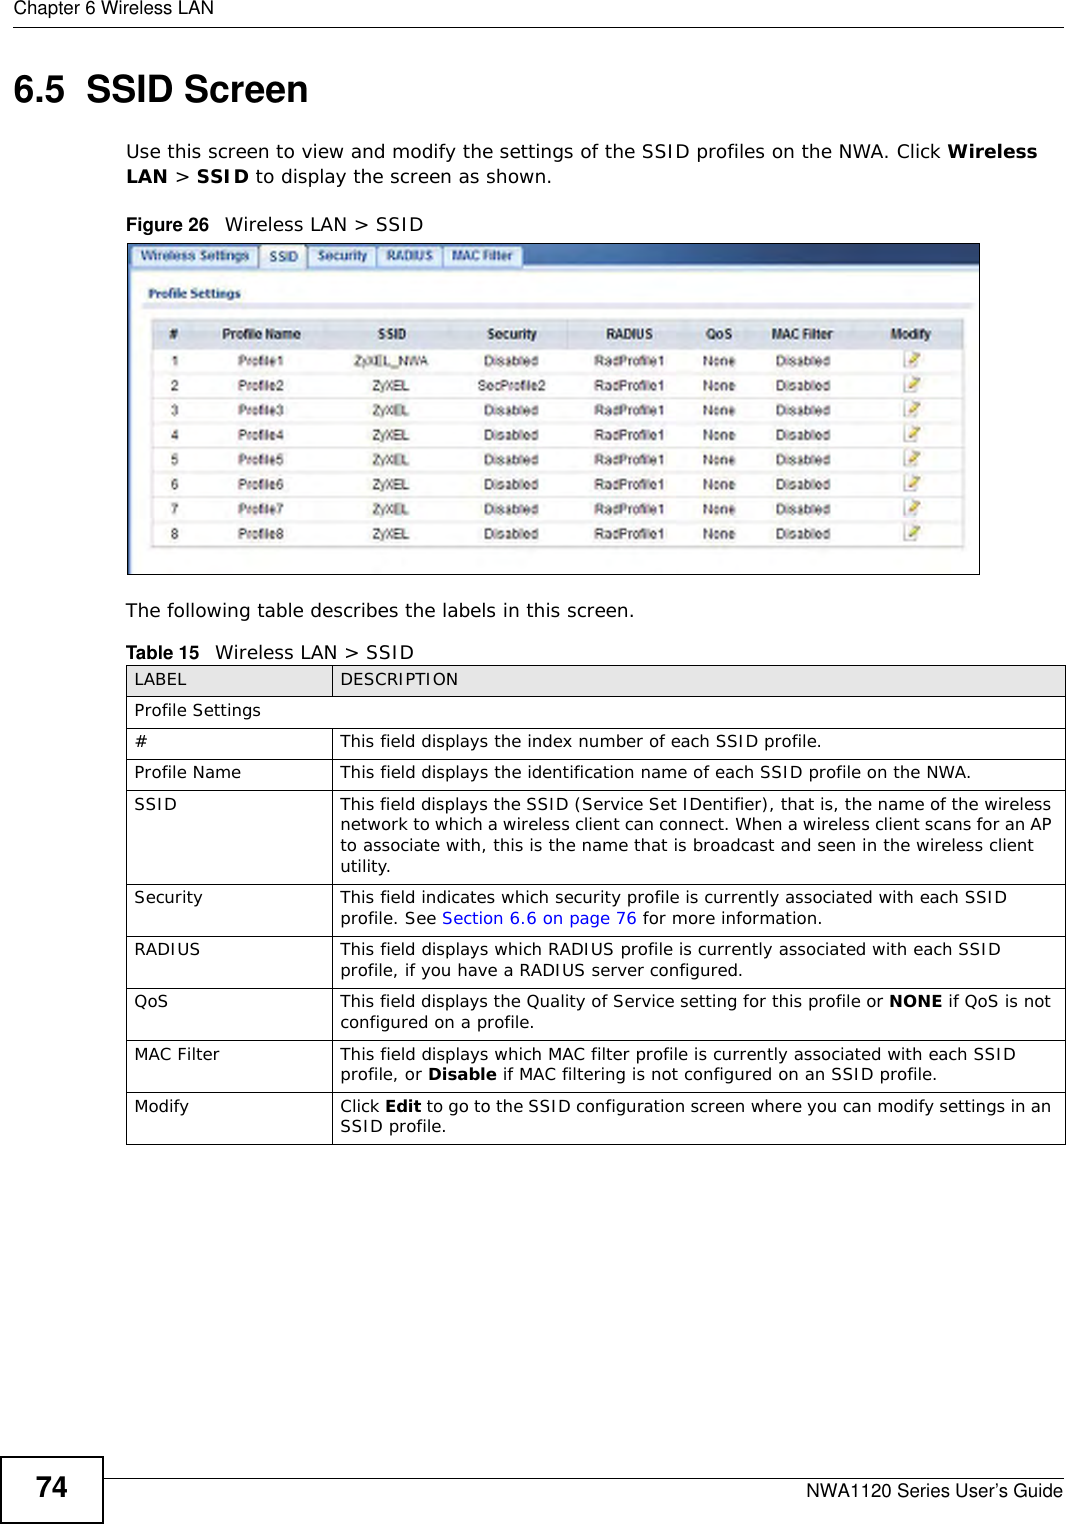 Chapter 6 Wireless LANNWA1120 Series User’s Guide746.5  SSID ScreenUse this screen to view and modify the settings of the SSID profiles on the NWA. Click Wireless LAN &gt; SSID to display the screen as shown.Figure 26   Wireless LAN &gt; SSIDThe following table describes the labels in this screen.Table 15   Wireless LAN &gt; SSIDLABEL DESCRIPTIONProfile Settings# This field displays the index number of each SSID profile.Profile Name This field displays the identification name of each SSID profile on the NWA.SSID This field displays the SSID (Service Set IDentifier), that is, the name of the wireless network to which a wireless client can connect. When a wireless client scans for an AP to associate with, this is the name that is broadcast and seen in the wireless client utility.Security This field indicates which security profile is currently associated with each SSID profile. See Section 6.6 on page 76 for more information.RADIUS This field displays which RADIUS profile is currently associated with each SSID profile, if you have a RADIUS server configured.QoS This field displays the Quality of Service setting for this profile or NONE if QoS is not configured on a profile.MAC Filter This field displays which MAC filter profile is currently associated with each SSID profile, or Disable if MAC filtering is not configured on an SSID profile.Modify Click Edit to go to the SSID configuration screen where you can modify settings in an SSID profile.